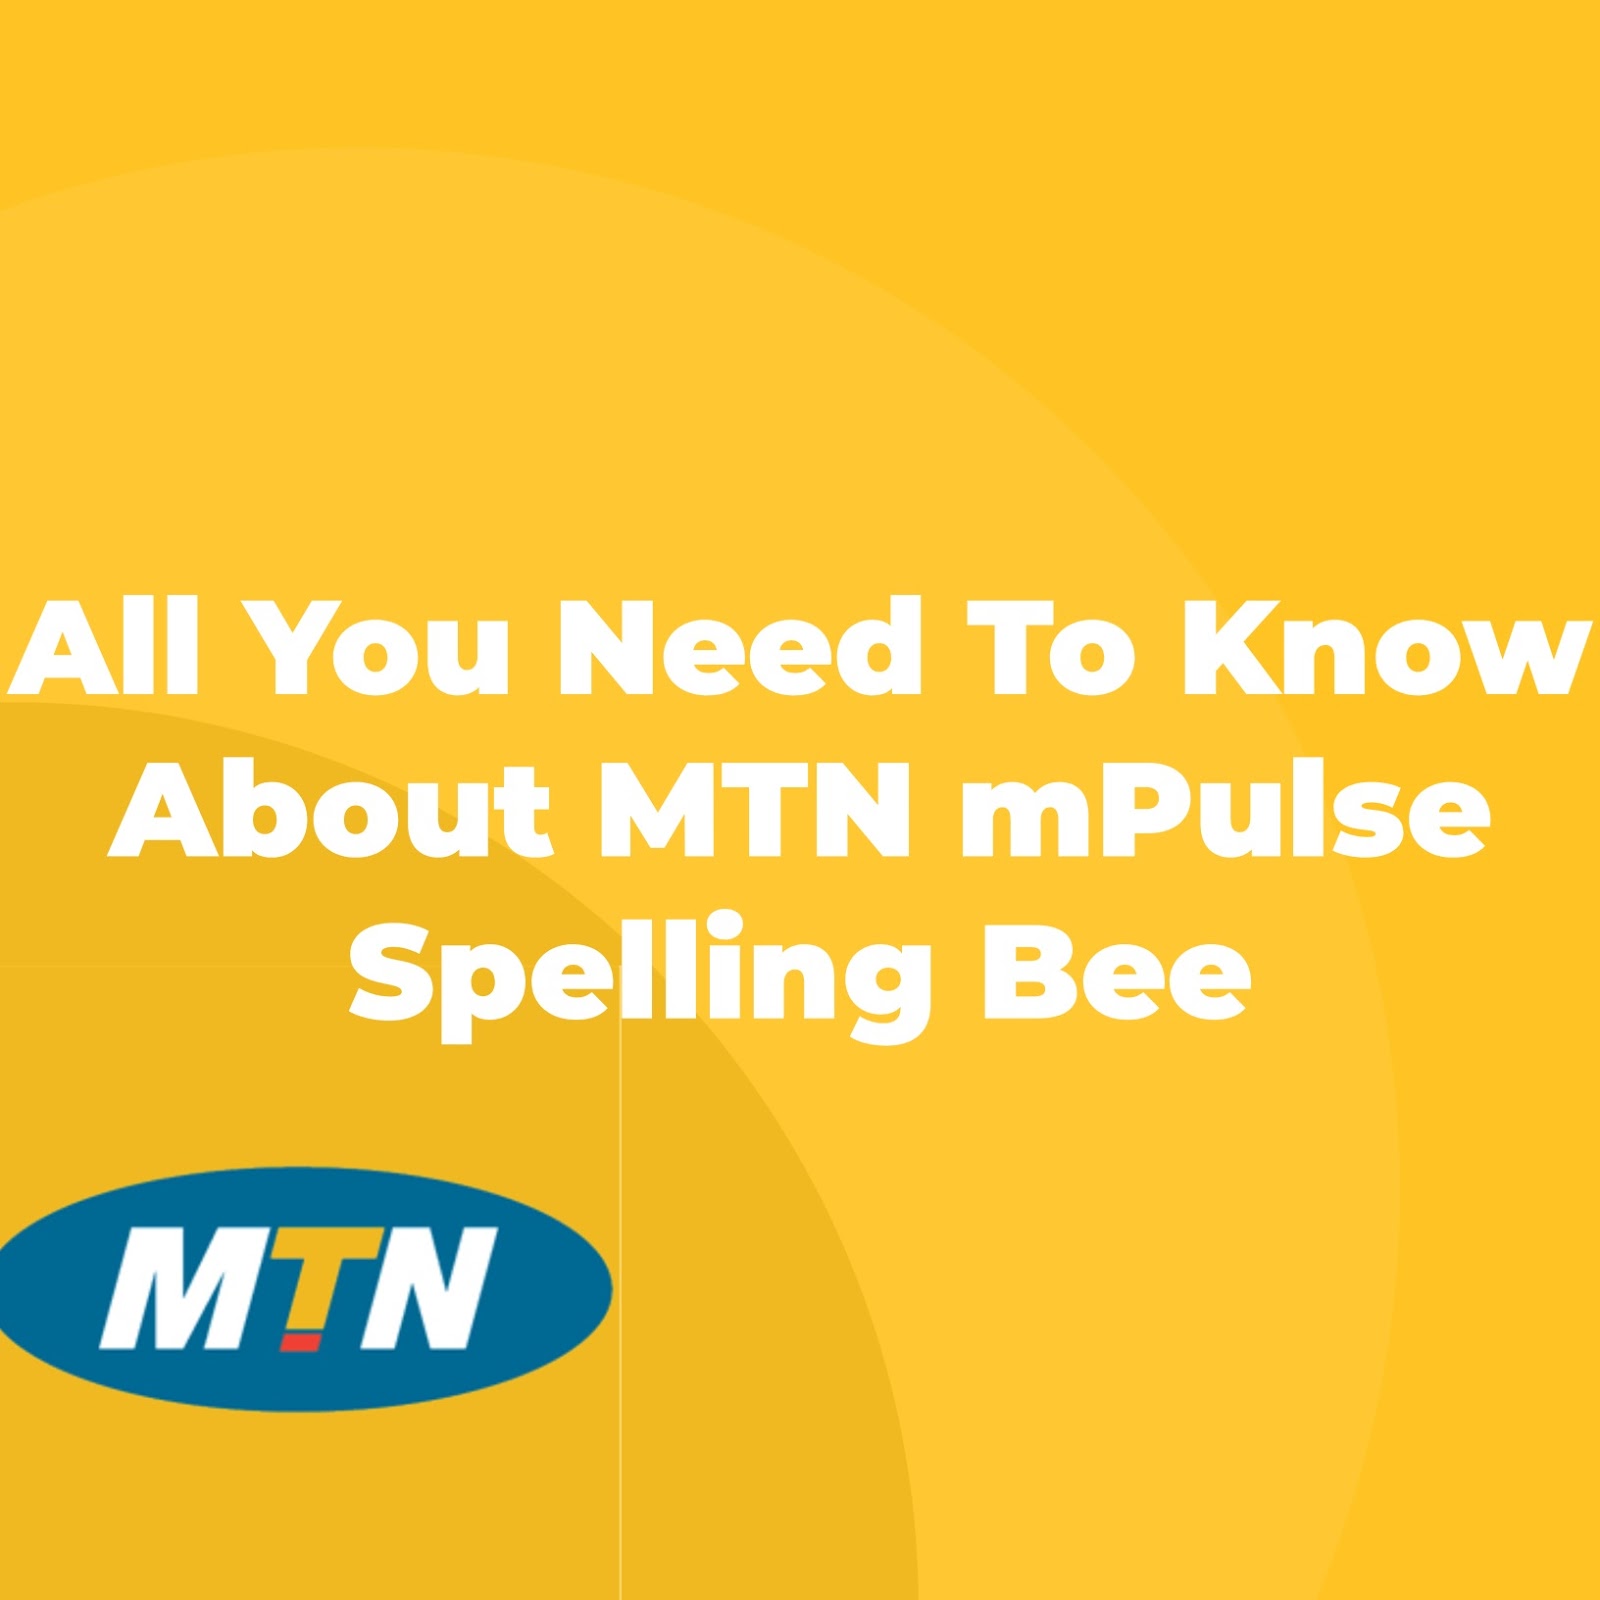 All You Need To Know About MTN mPulse Spelling Bee